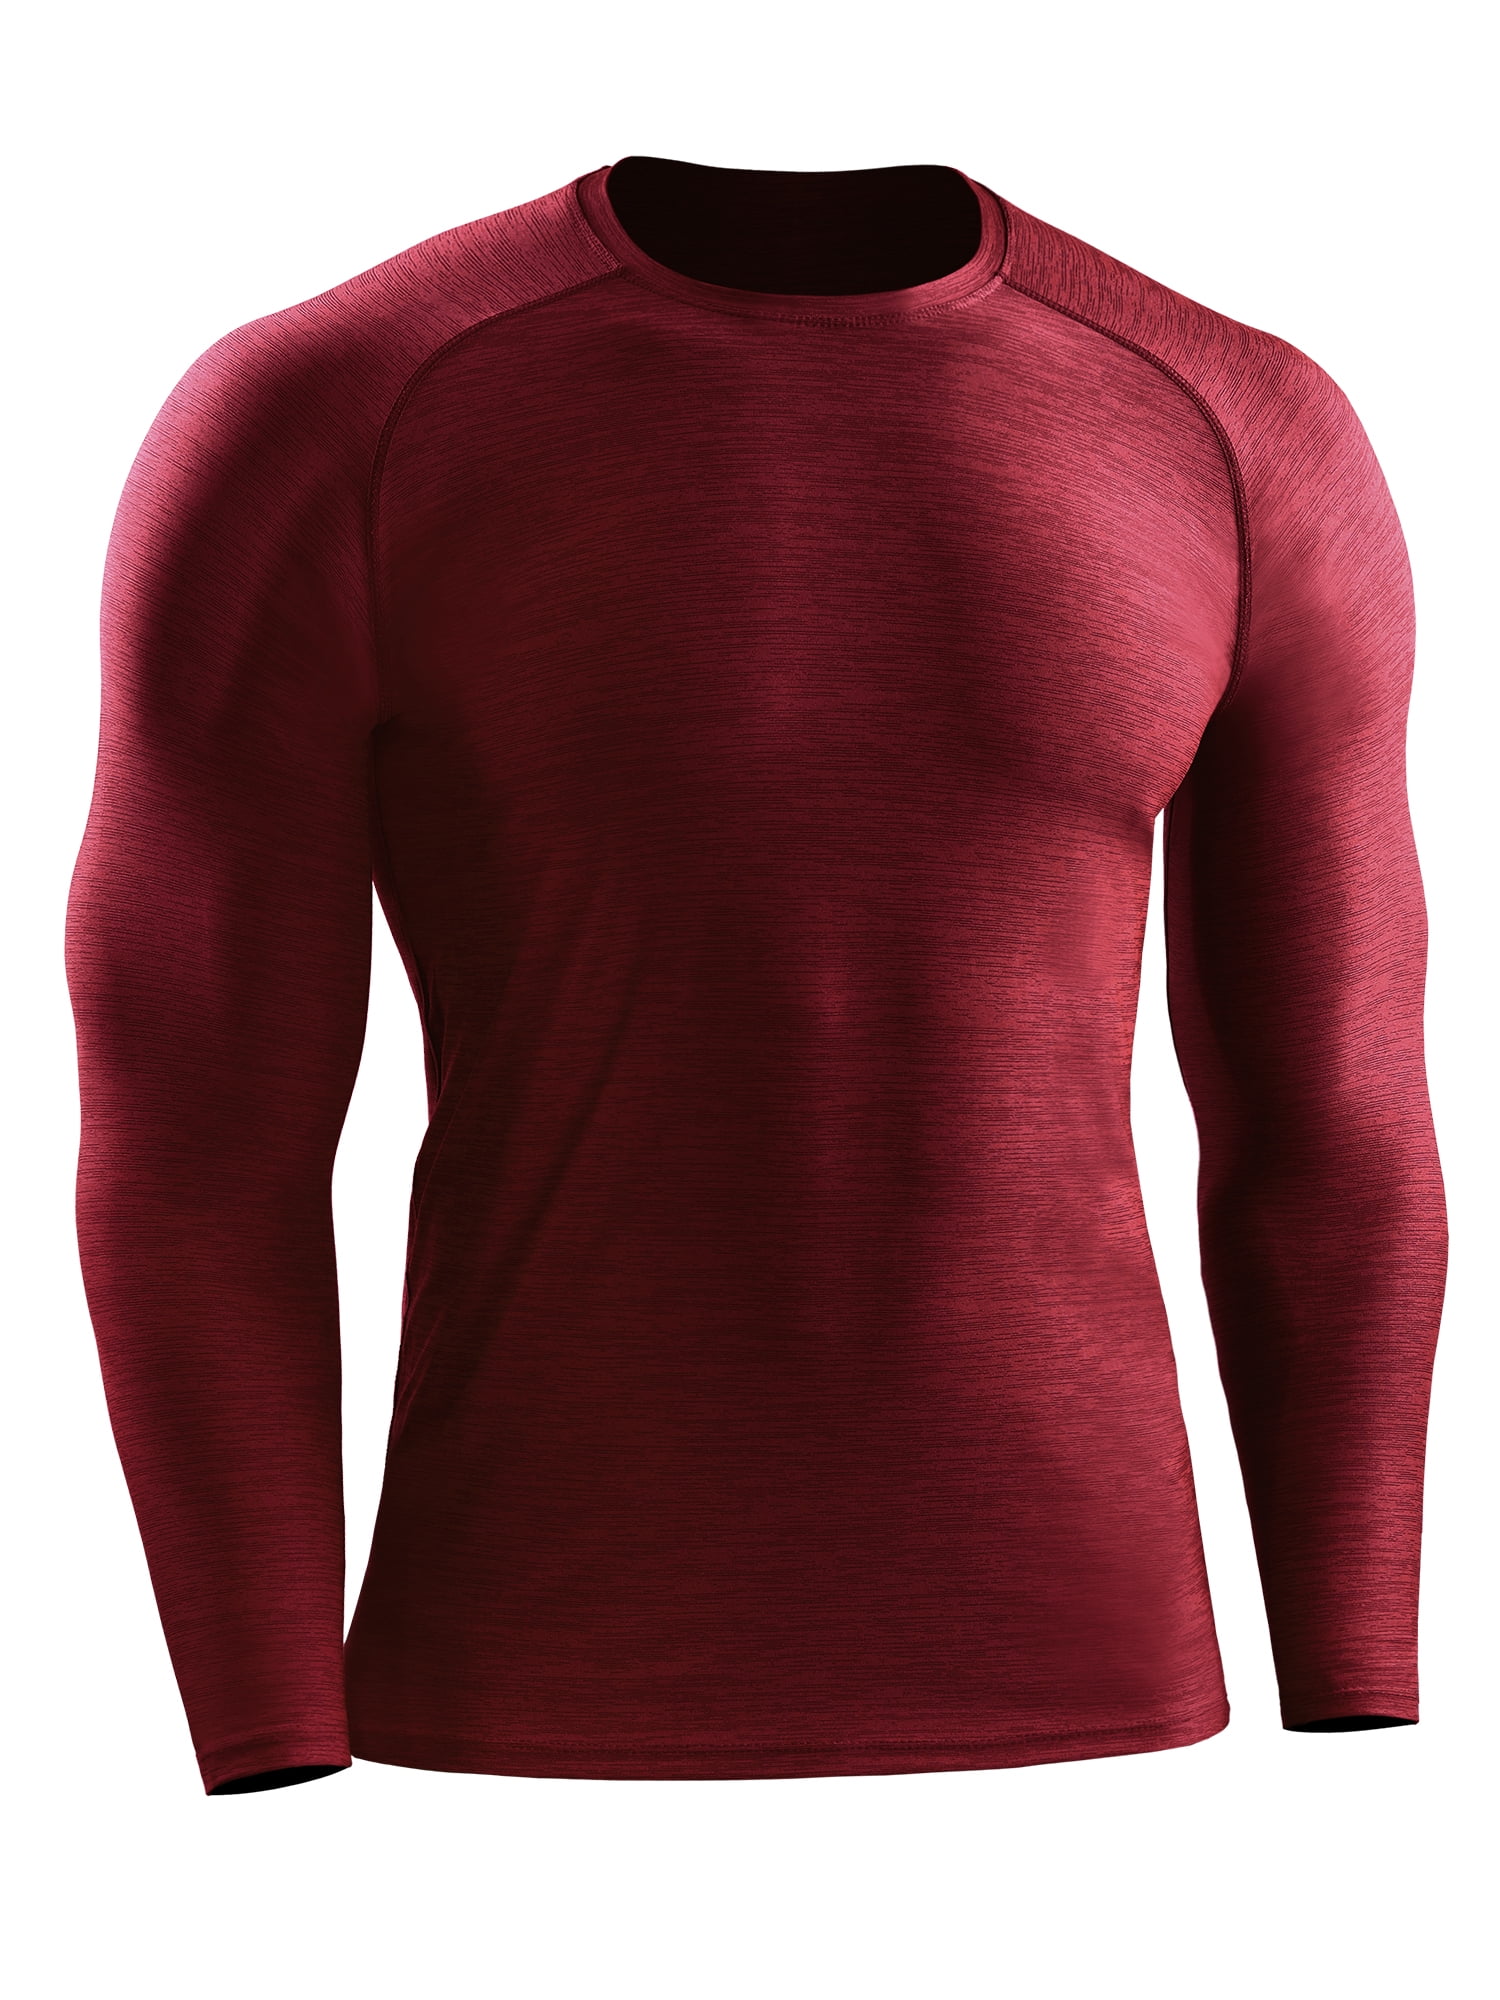 Men Compression Base Layer Tee Long Sleeve Thermal GYM Sport T Shirt Top Workout 